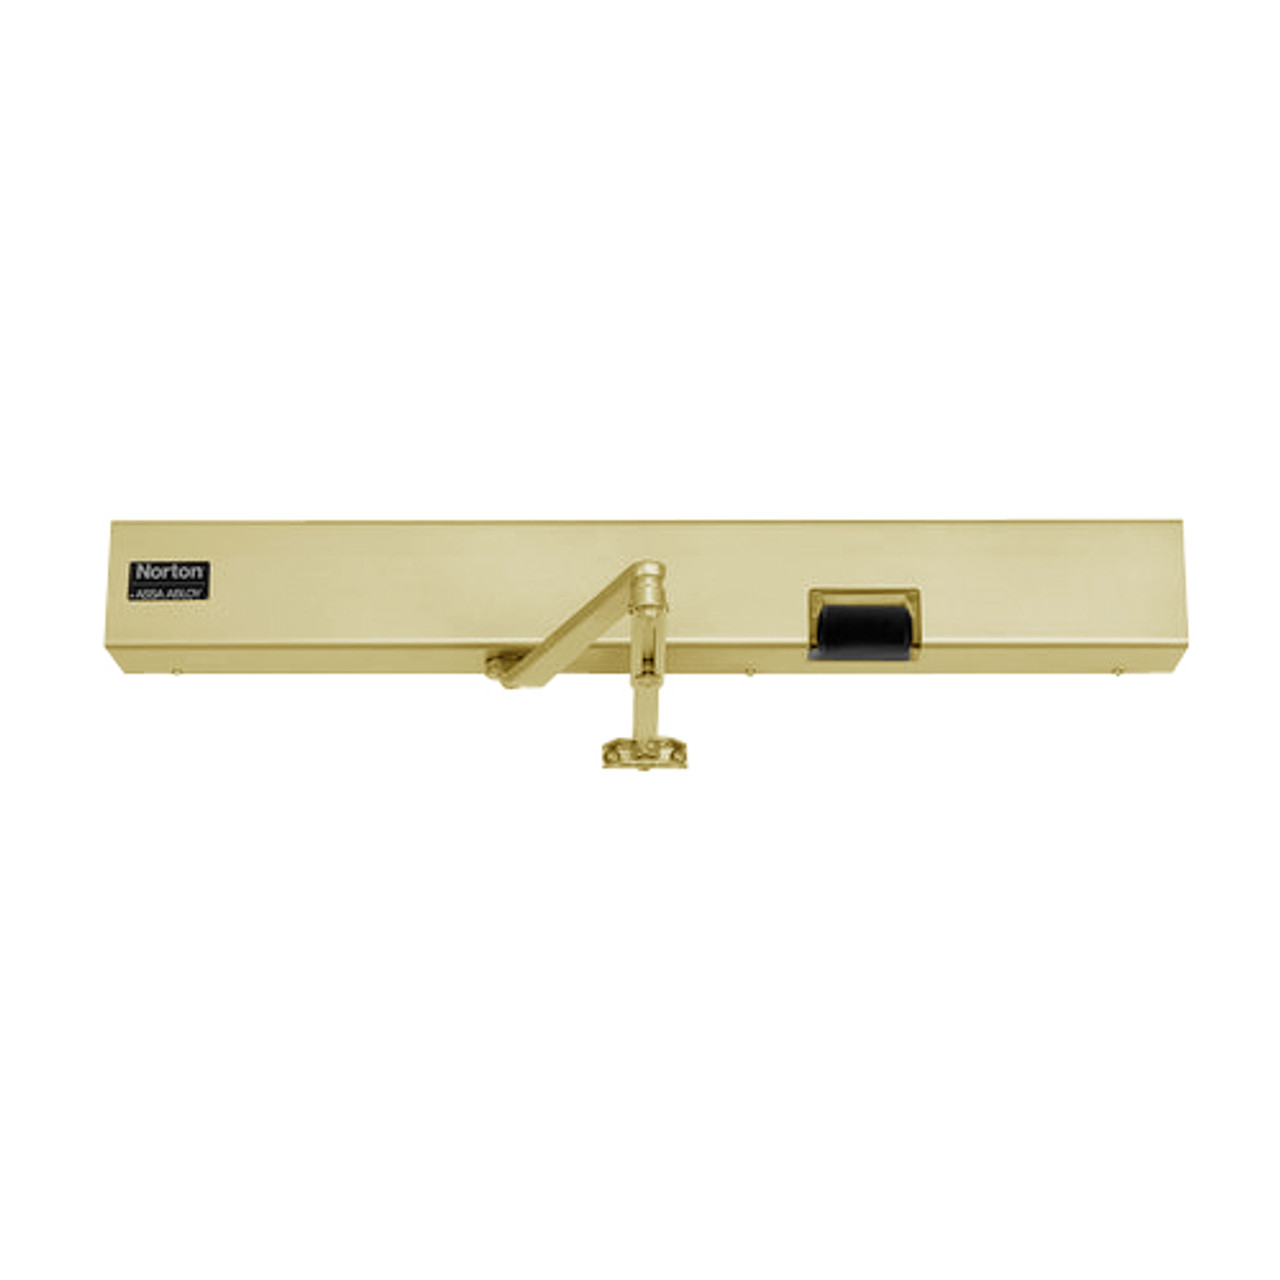 7125SZ-LH-120VAC-696 Norton 7100SZ Series Safe Zone Multi-Point Closer/Holder with Motion Sensor and Push Side Double Lever 11 inch Main Arm in Gold Finish